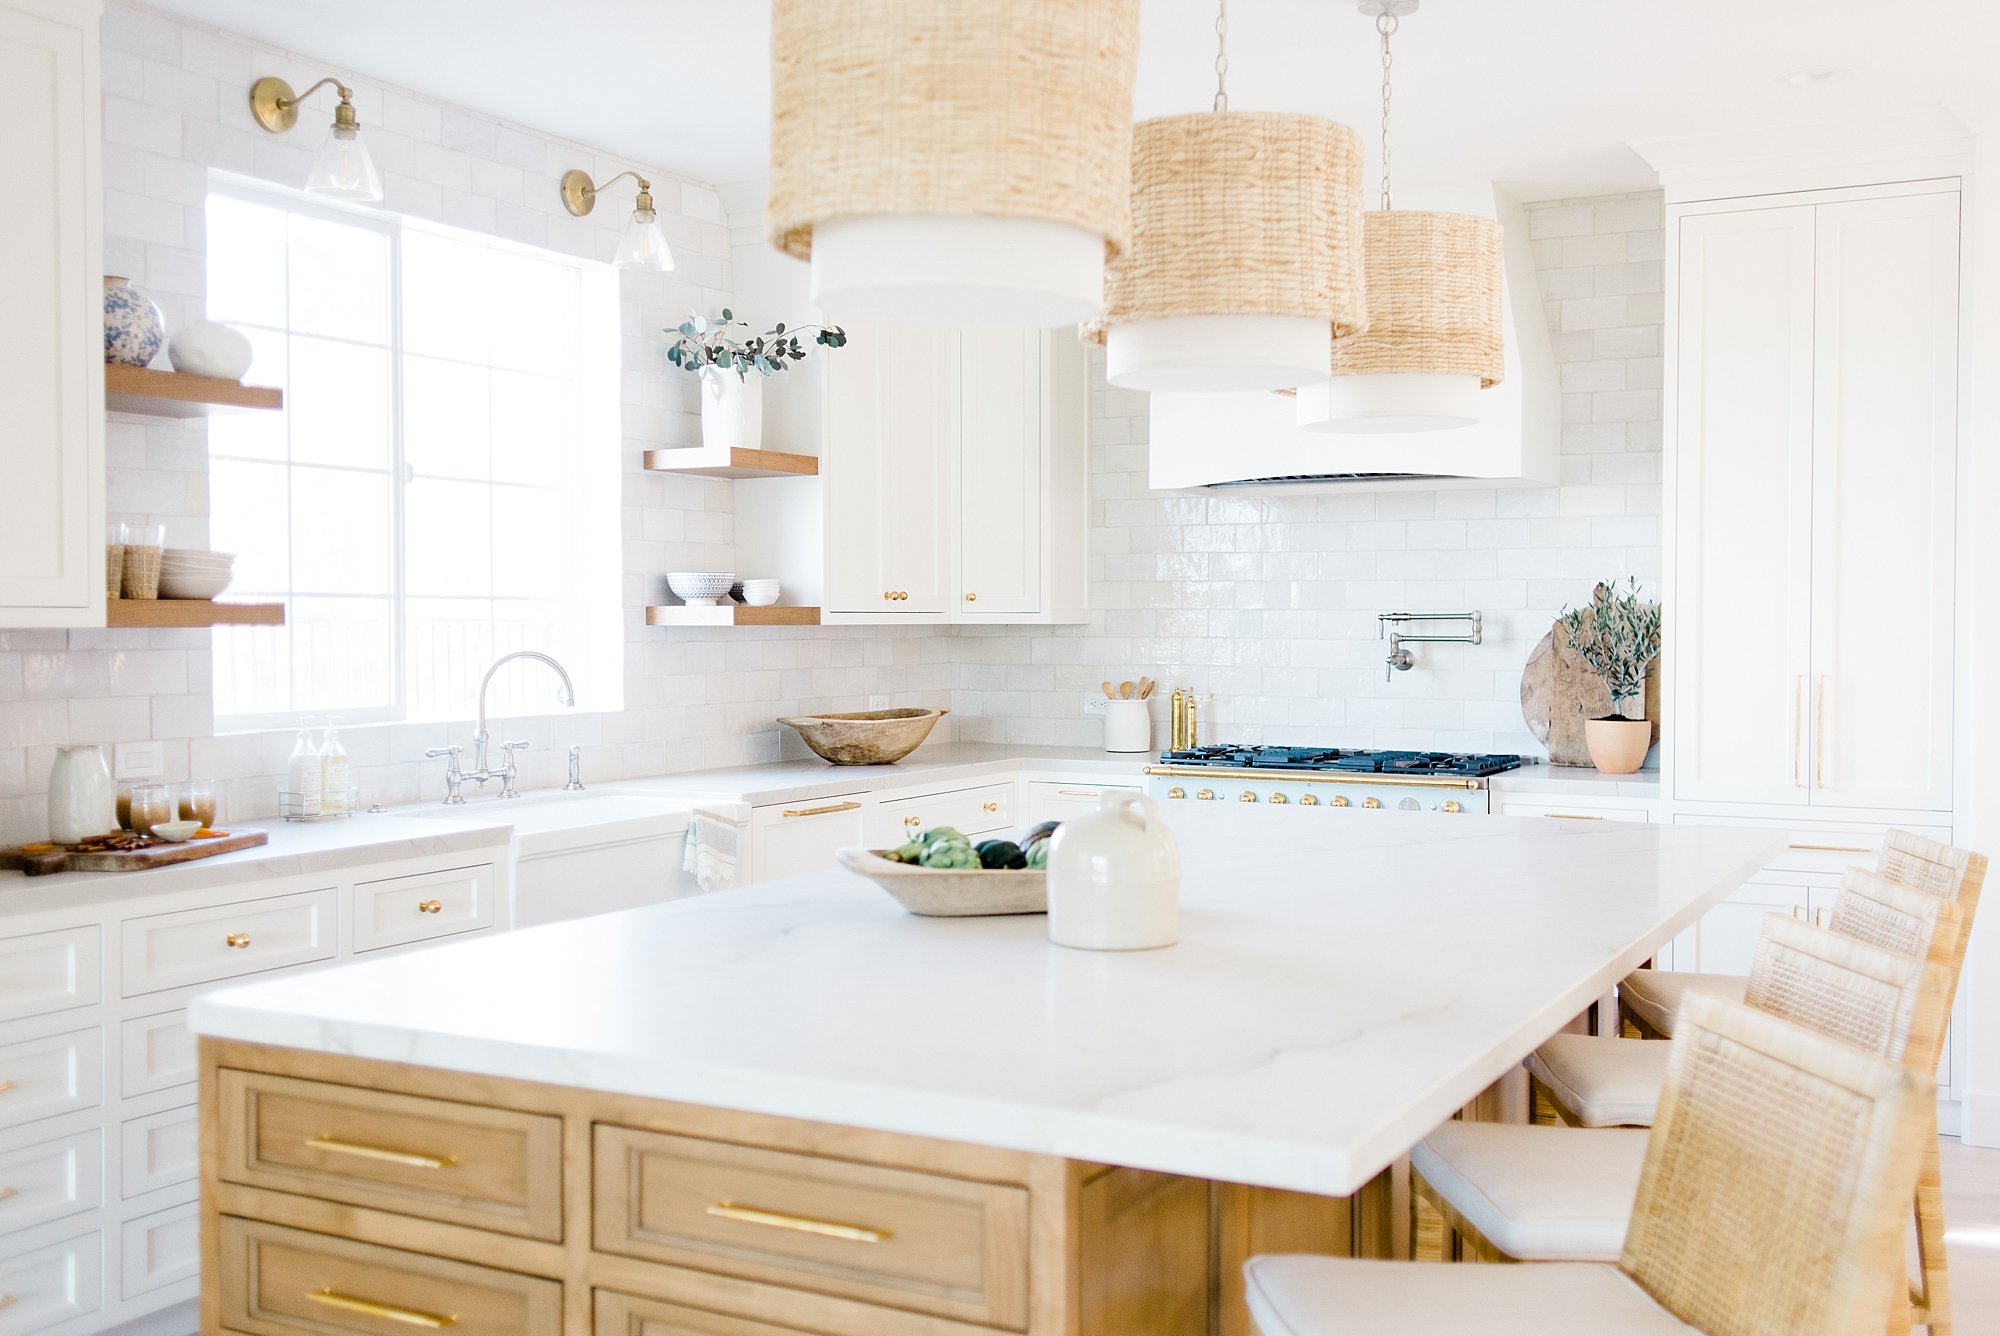  Project Jolie Kitchen Remodel: Blending French Country and San Diego Coastal Inspiration 